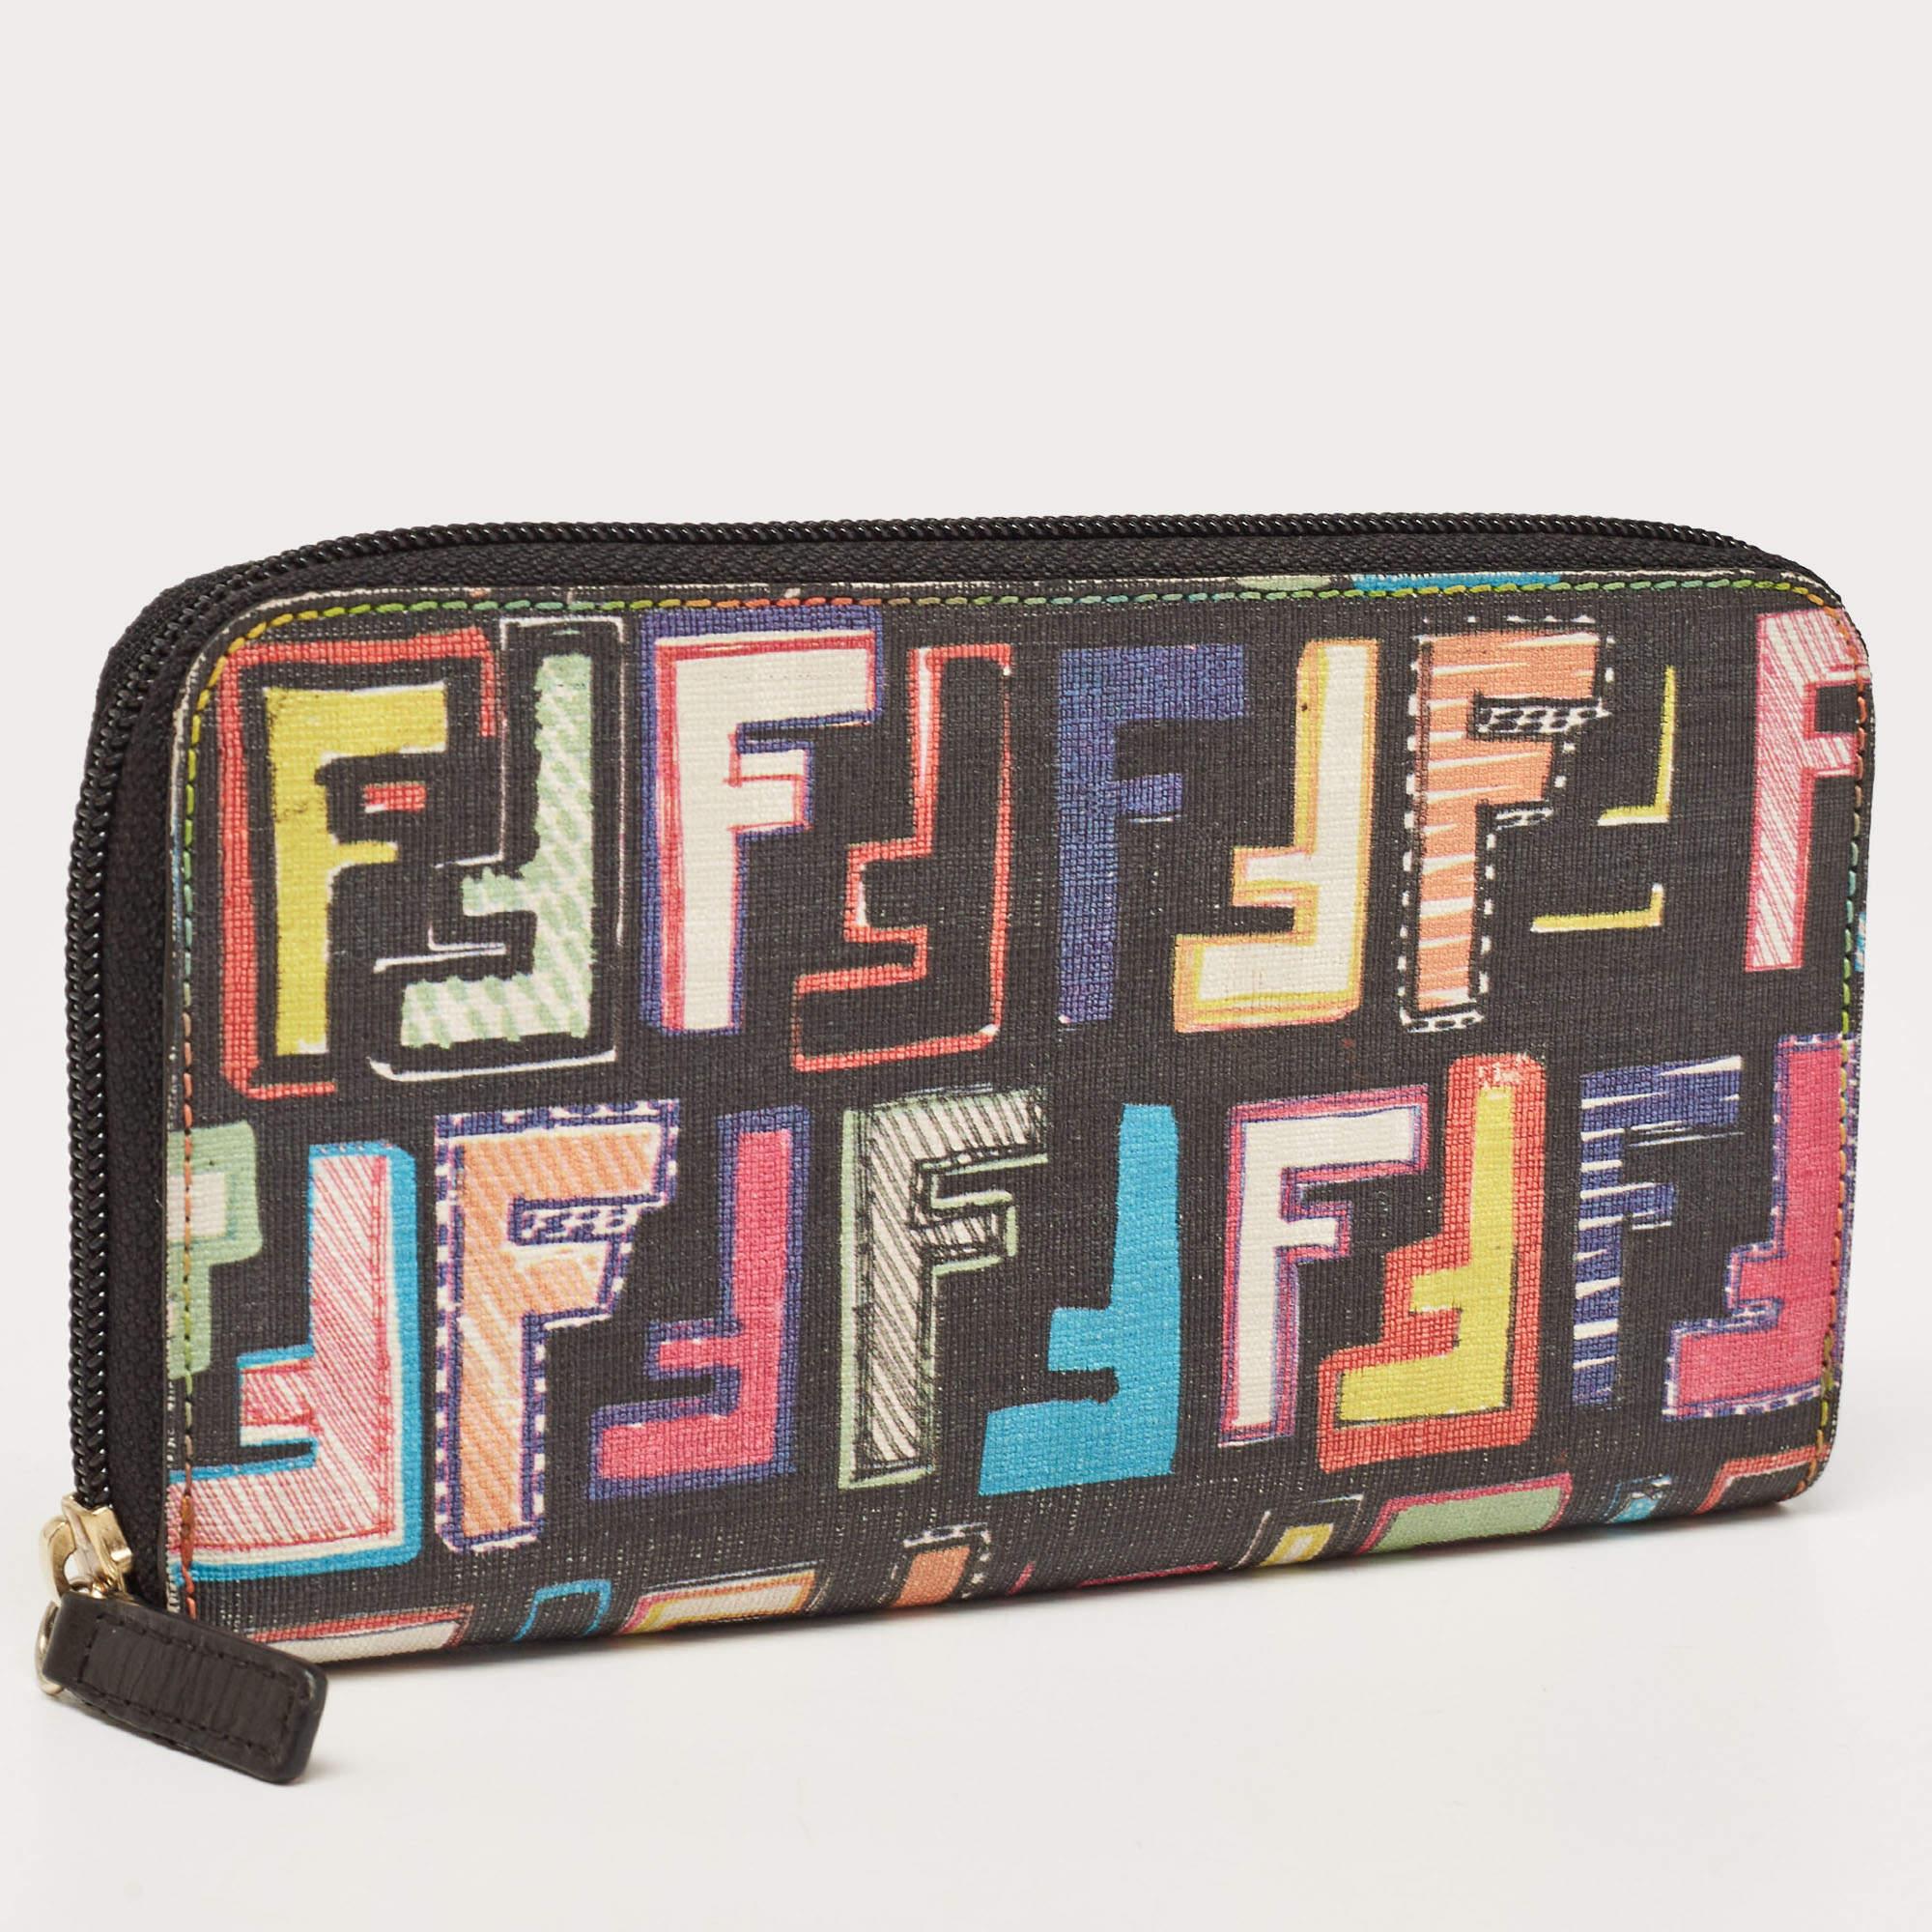 Add the Fendi touch to your everyday accessories by owning this wallet! It is made from multicolor Zucca coated canvas and its interior is secured by a zip closure. The interior flaunts multiple card slots, open compartments for cash or bills and a